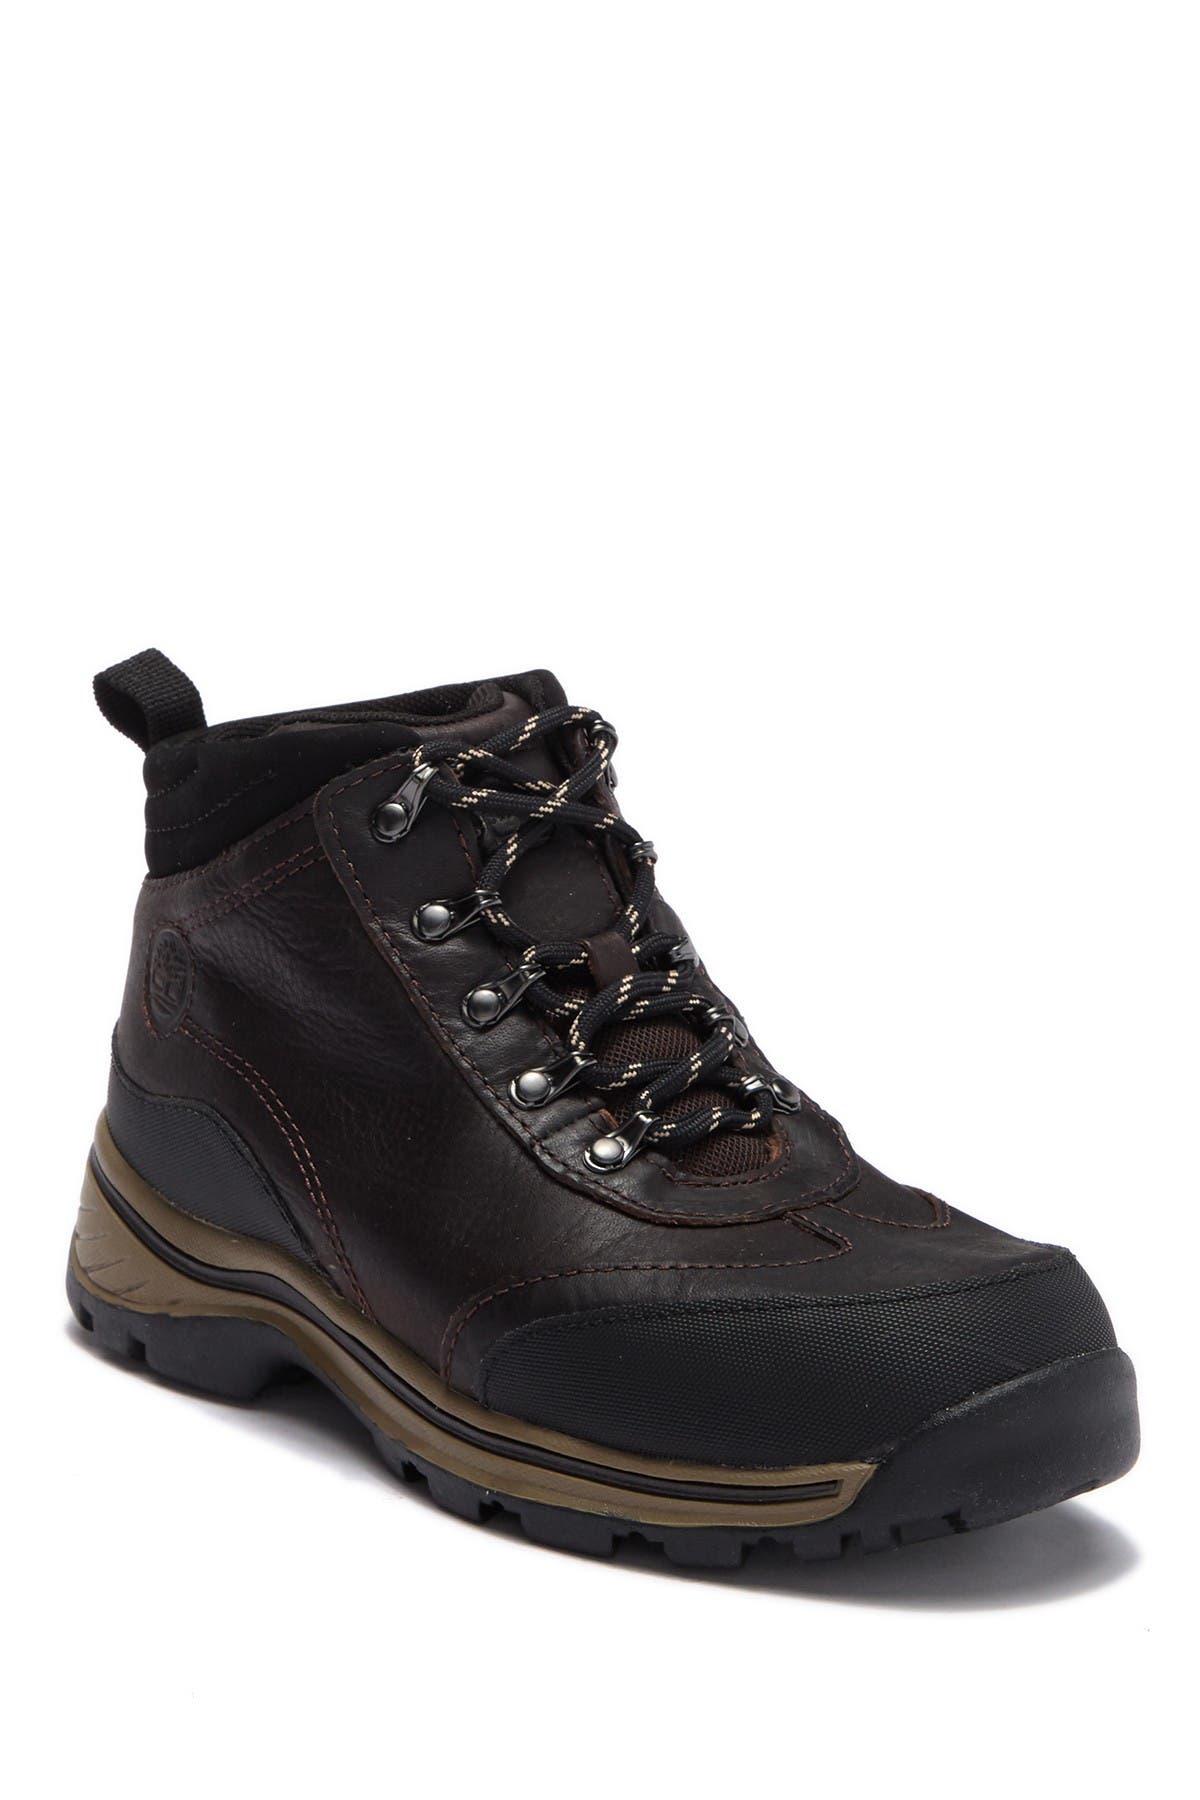 Timberland | Back Road Hiking Boot 